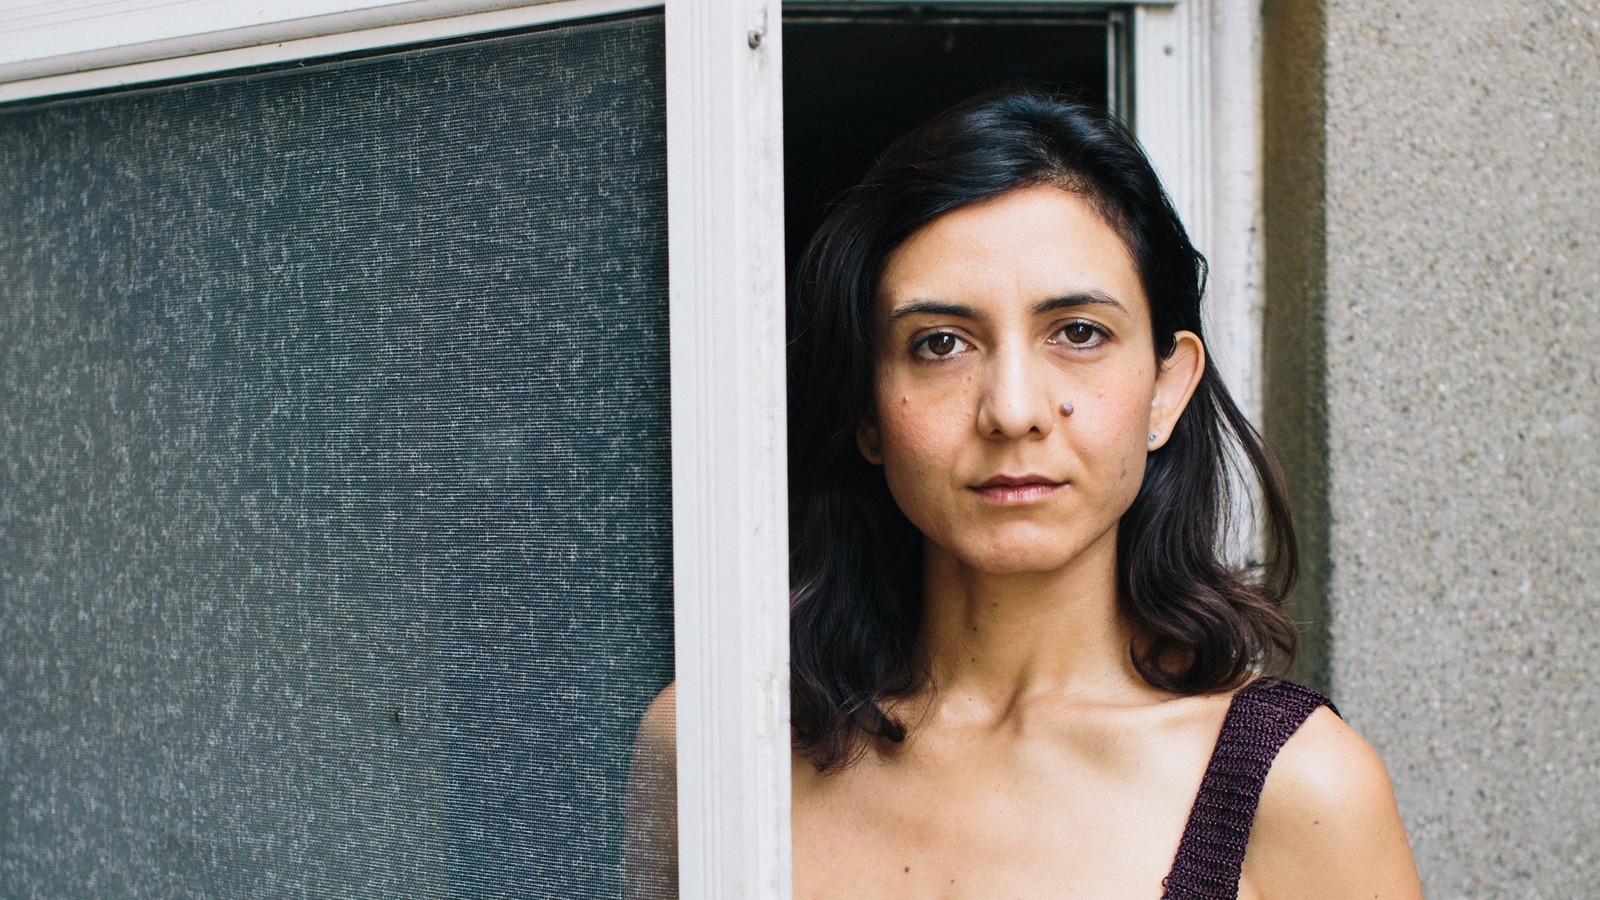 Analysis: Ottessa Moshfegh's My Year of Rest and Relaxation.